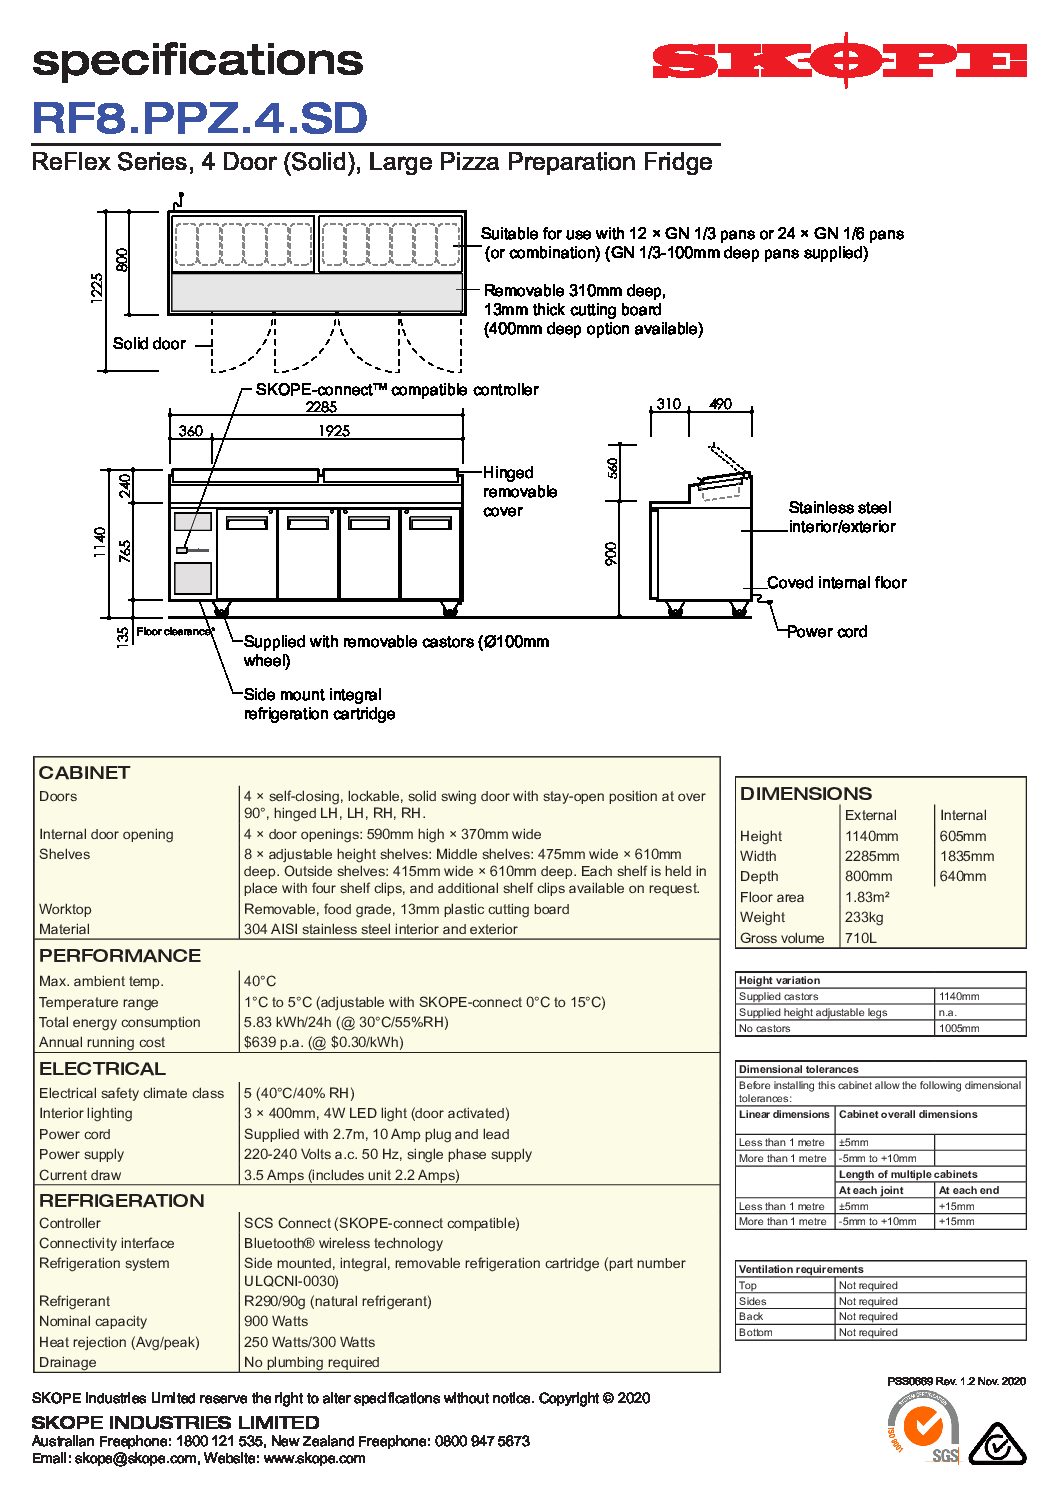 cover page of the ReFlex 4 Solid Door GN Compatible Pizza Preparation Fridge specification sheet pdf